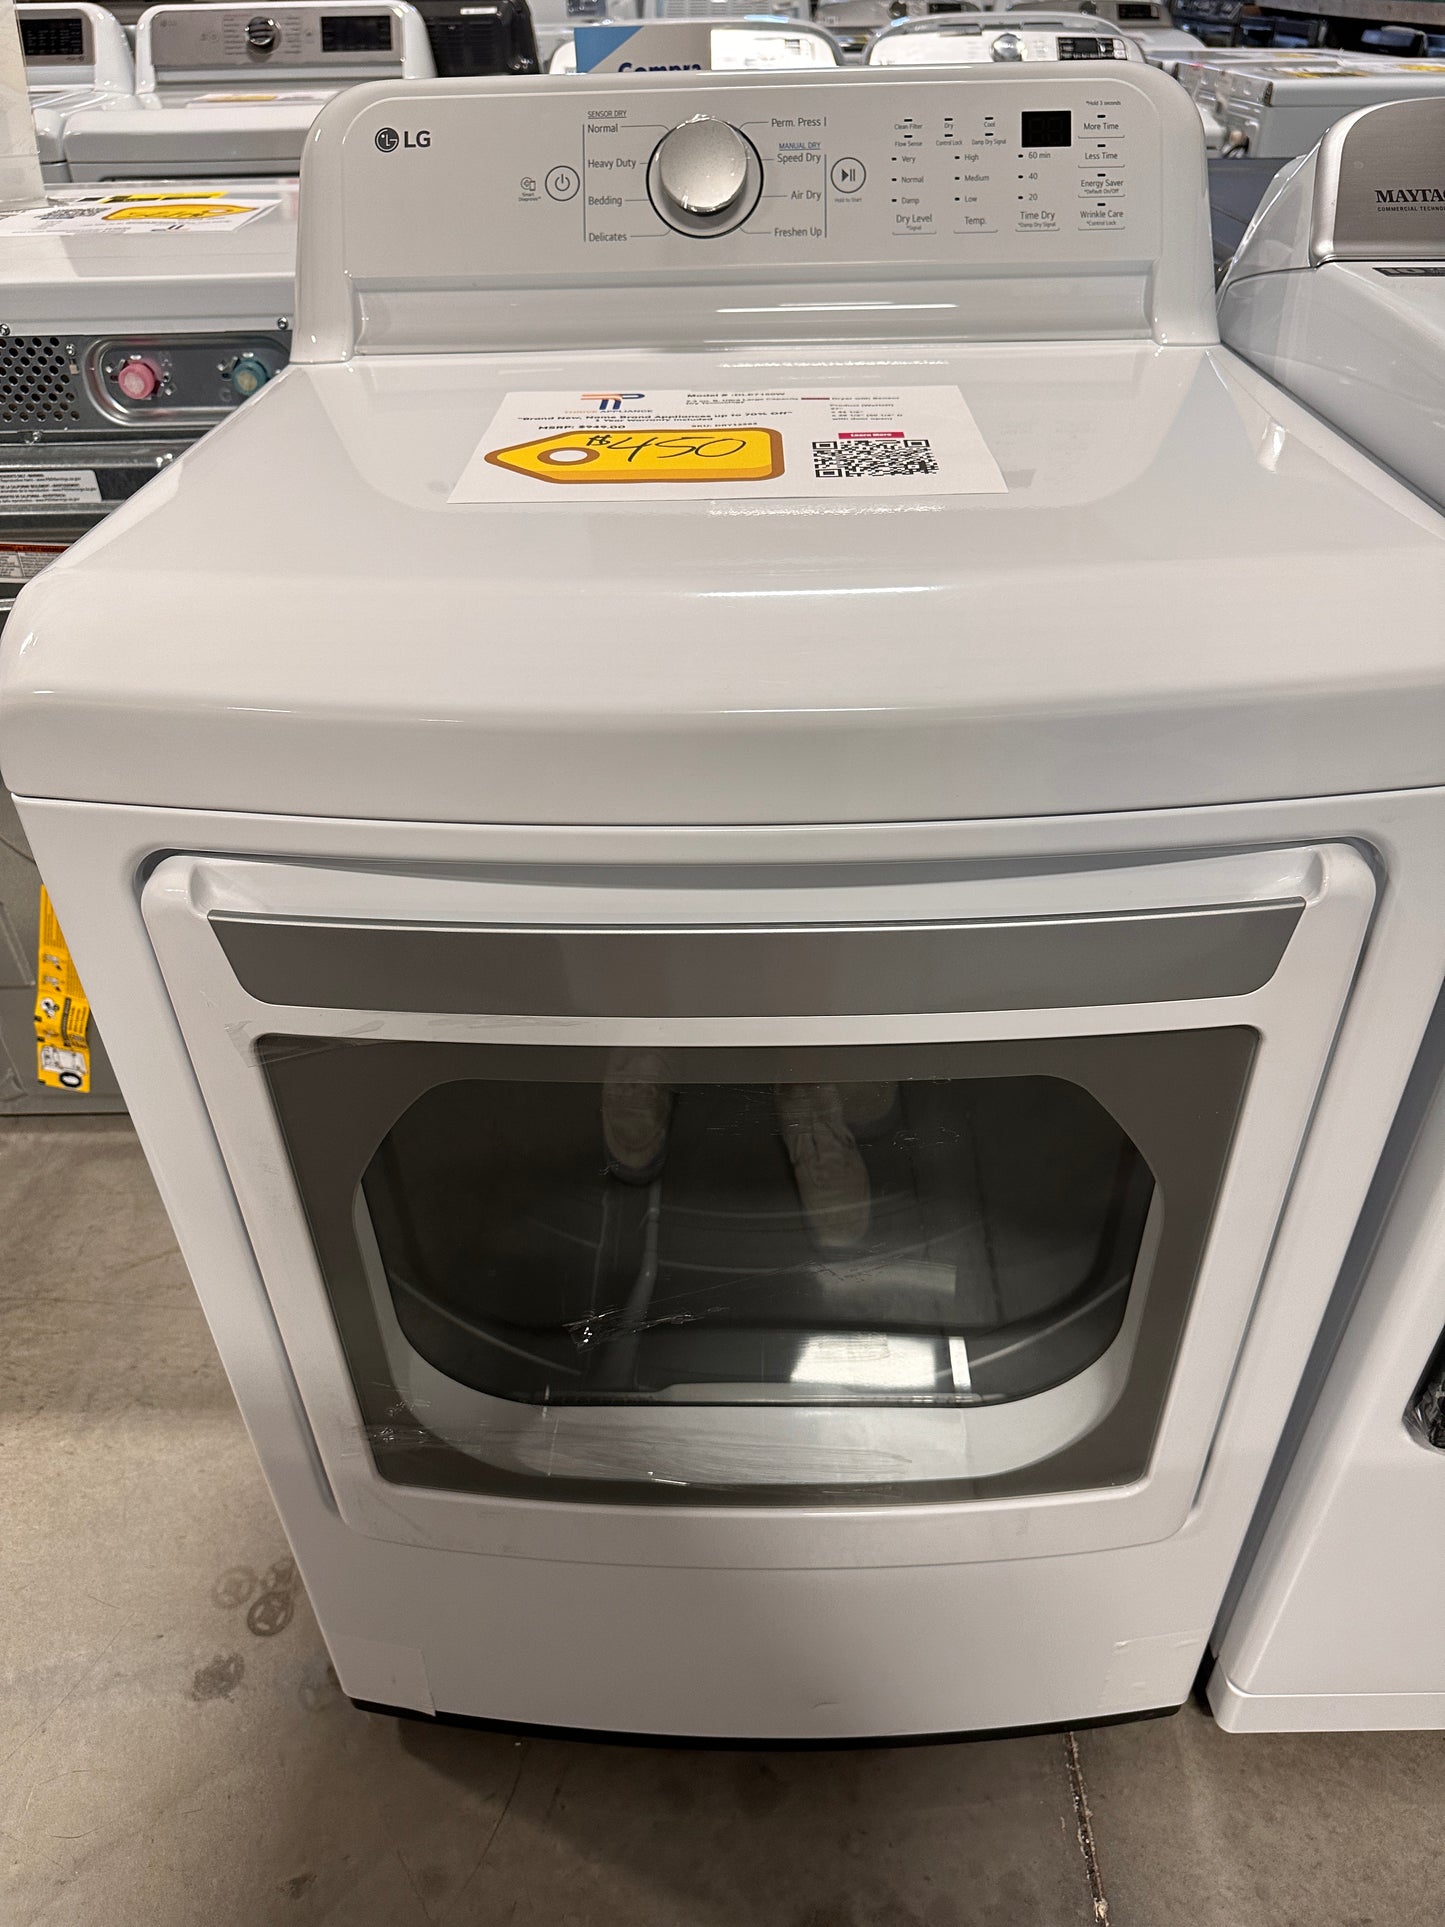 NEW LG SMART ELECTRIC DRYER with SENSOR DRY Model:DLE7150W  DRY12383